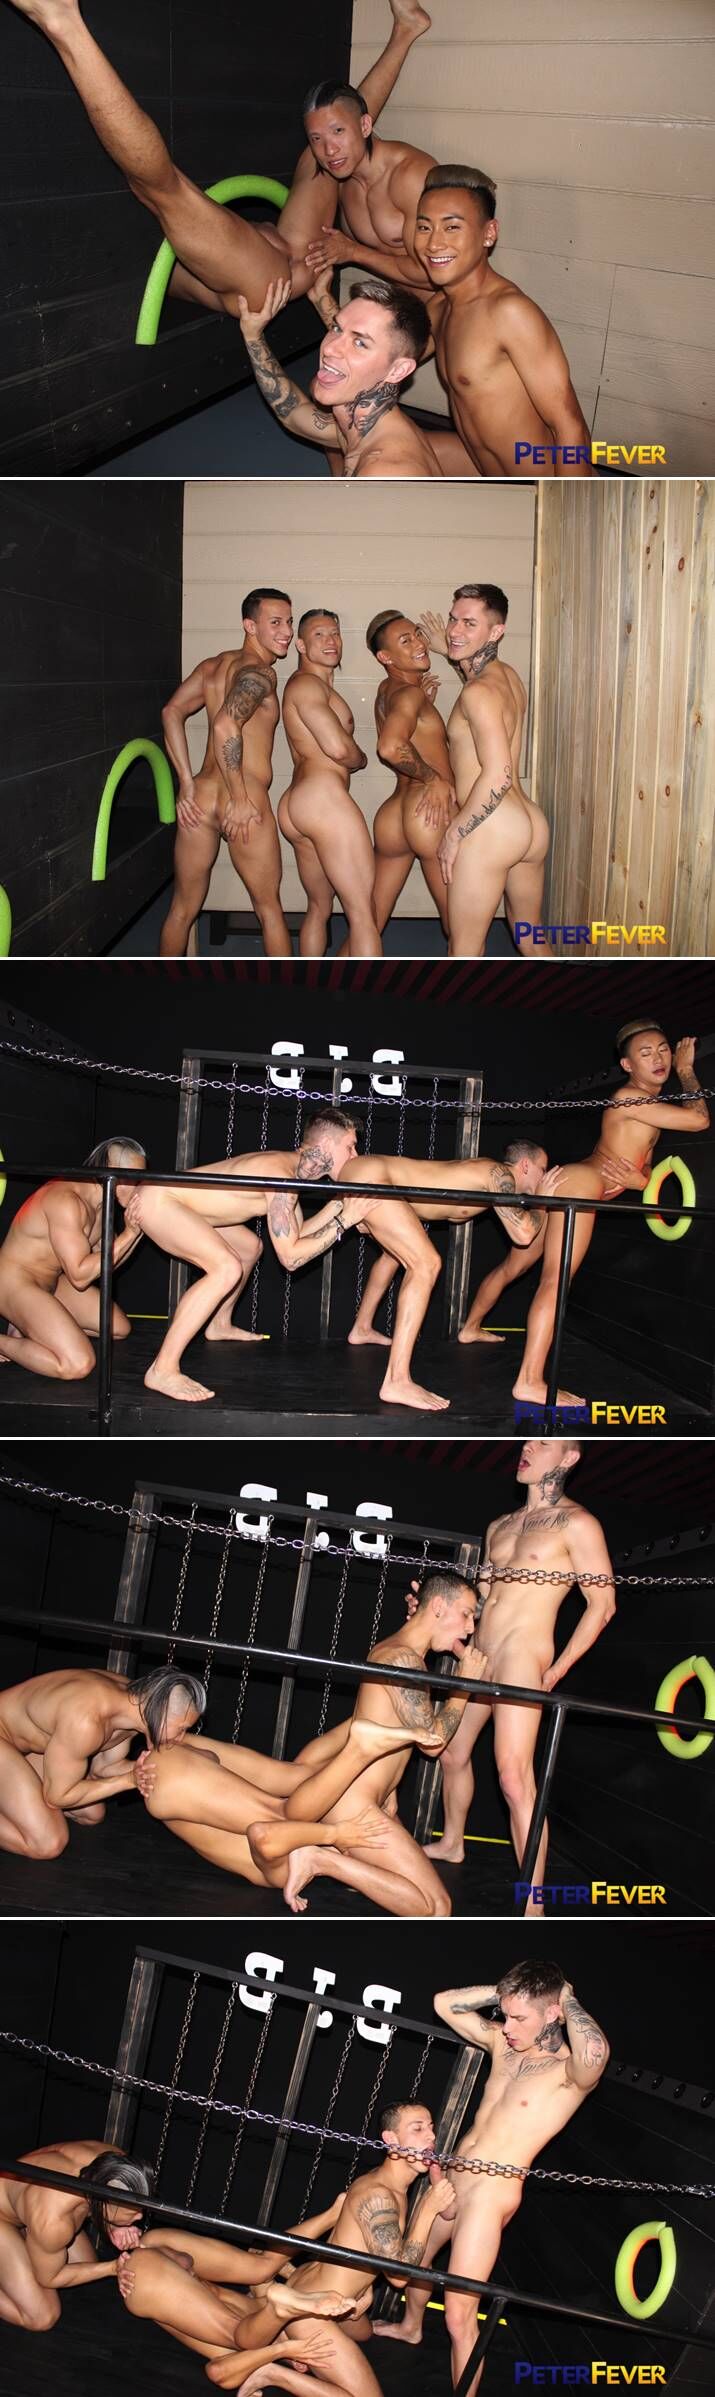 Peter Fever - Sauna Nights: The Orgy